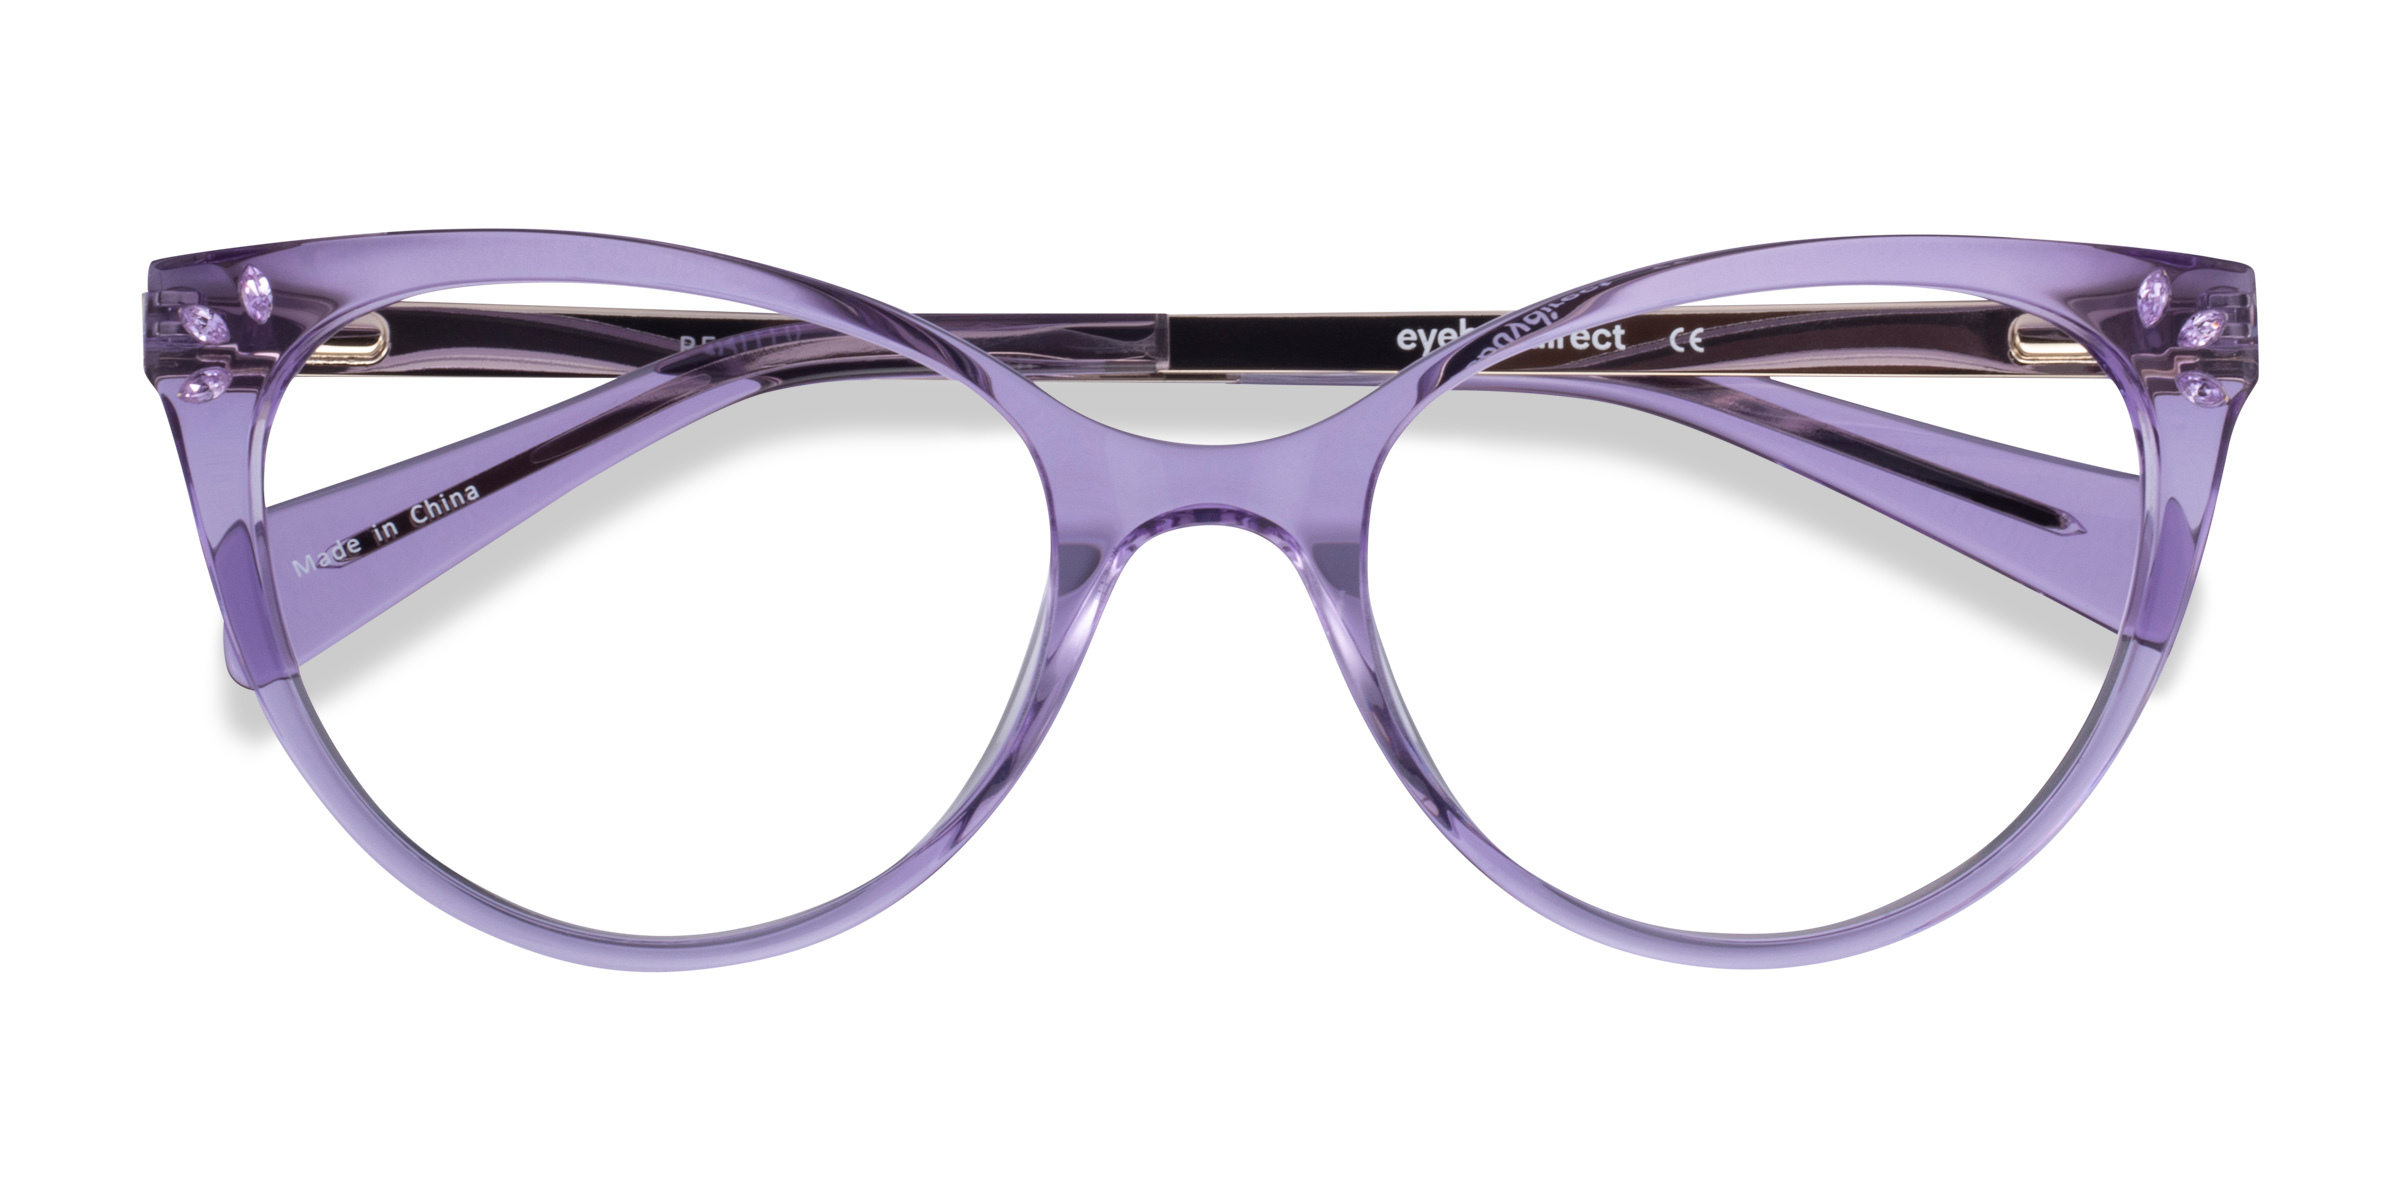 Purple Glasses Bold Colors And Styles Eyebuydirect